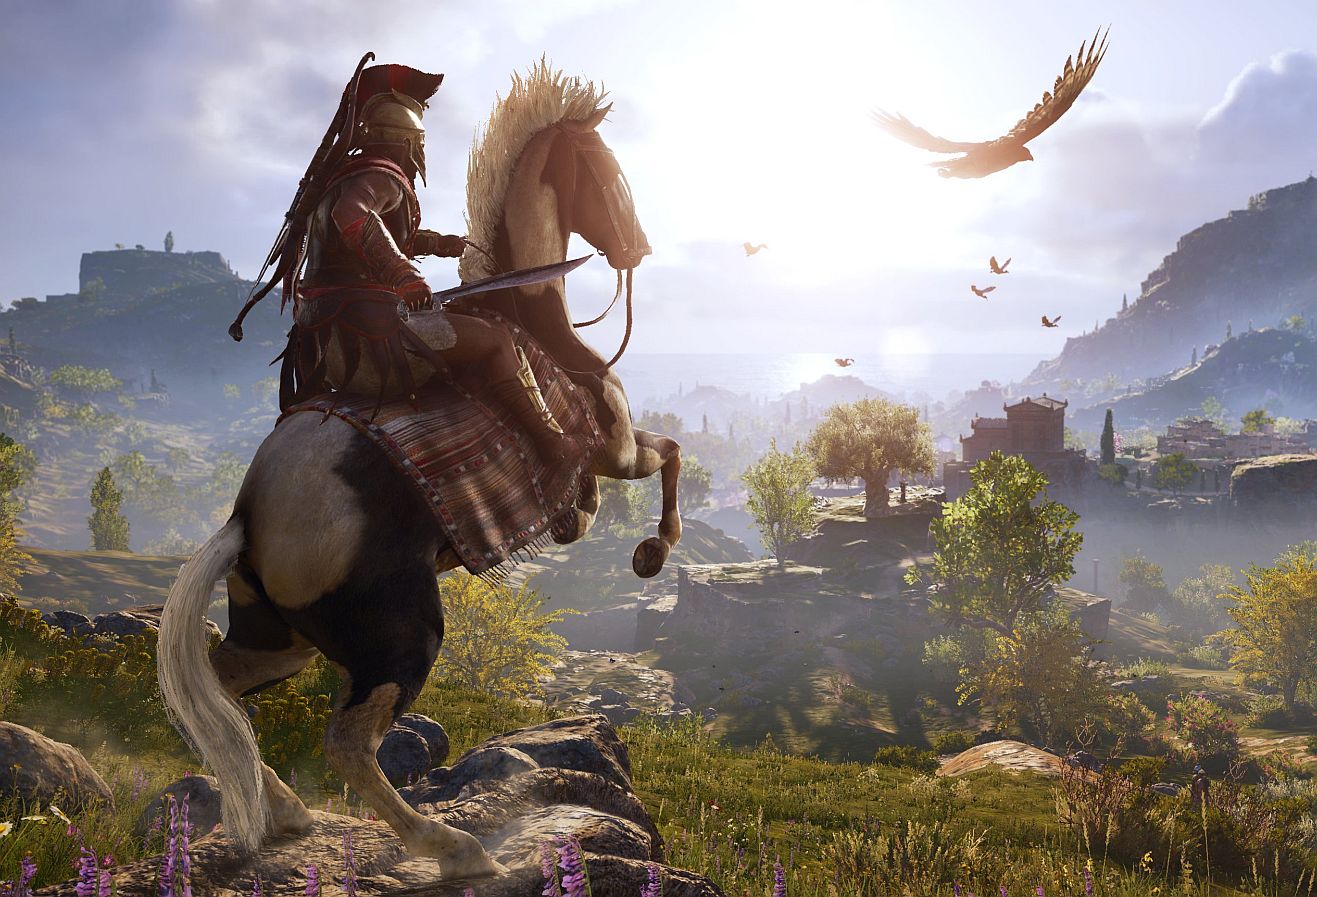 Image for Assassin's Creed: next-gen could feature multiple historic timelines in one game